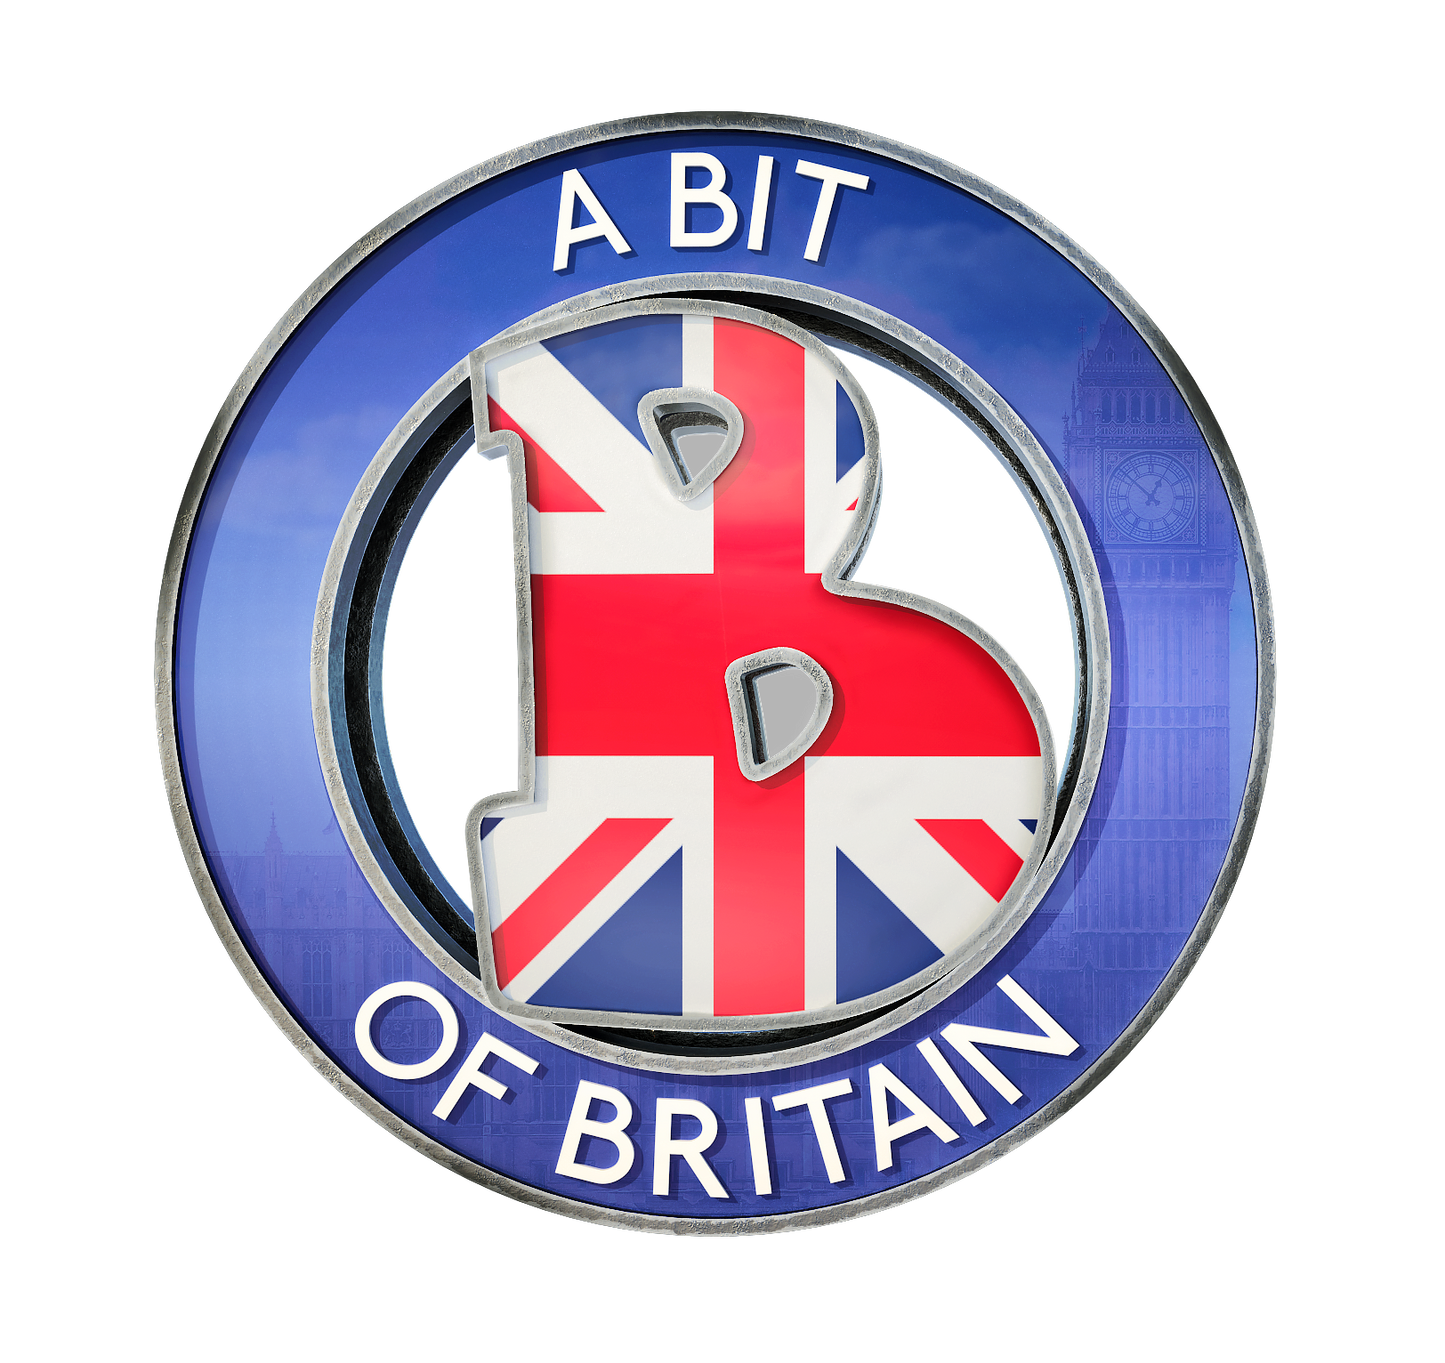 A Bit of Britain Gift Card